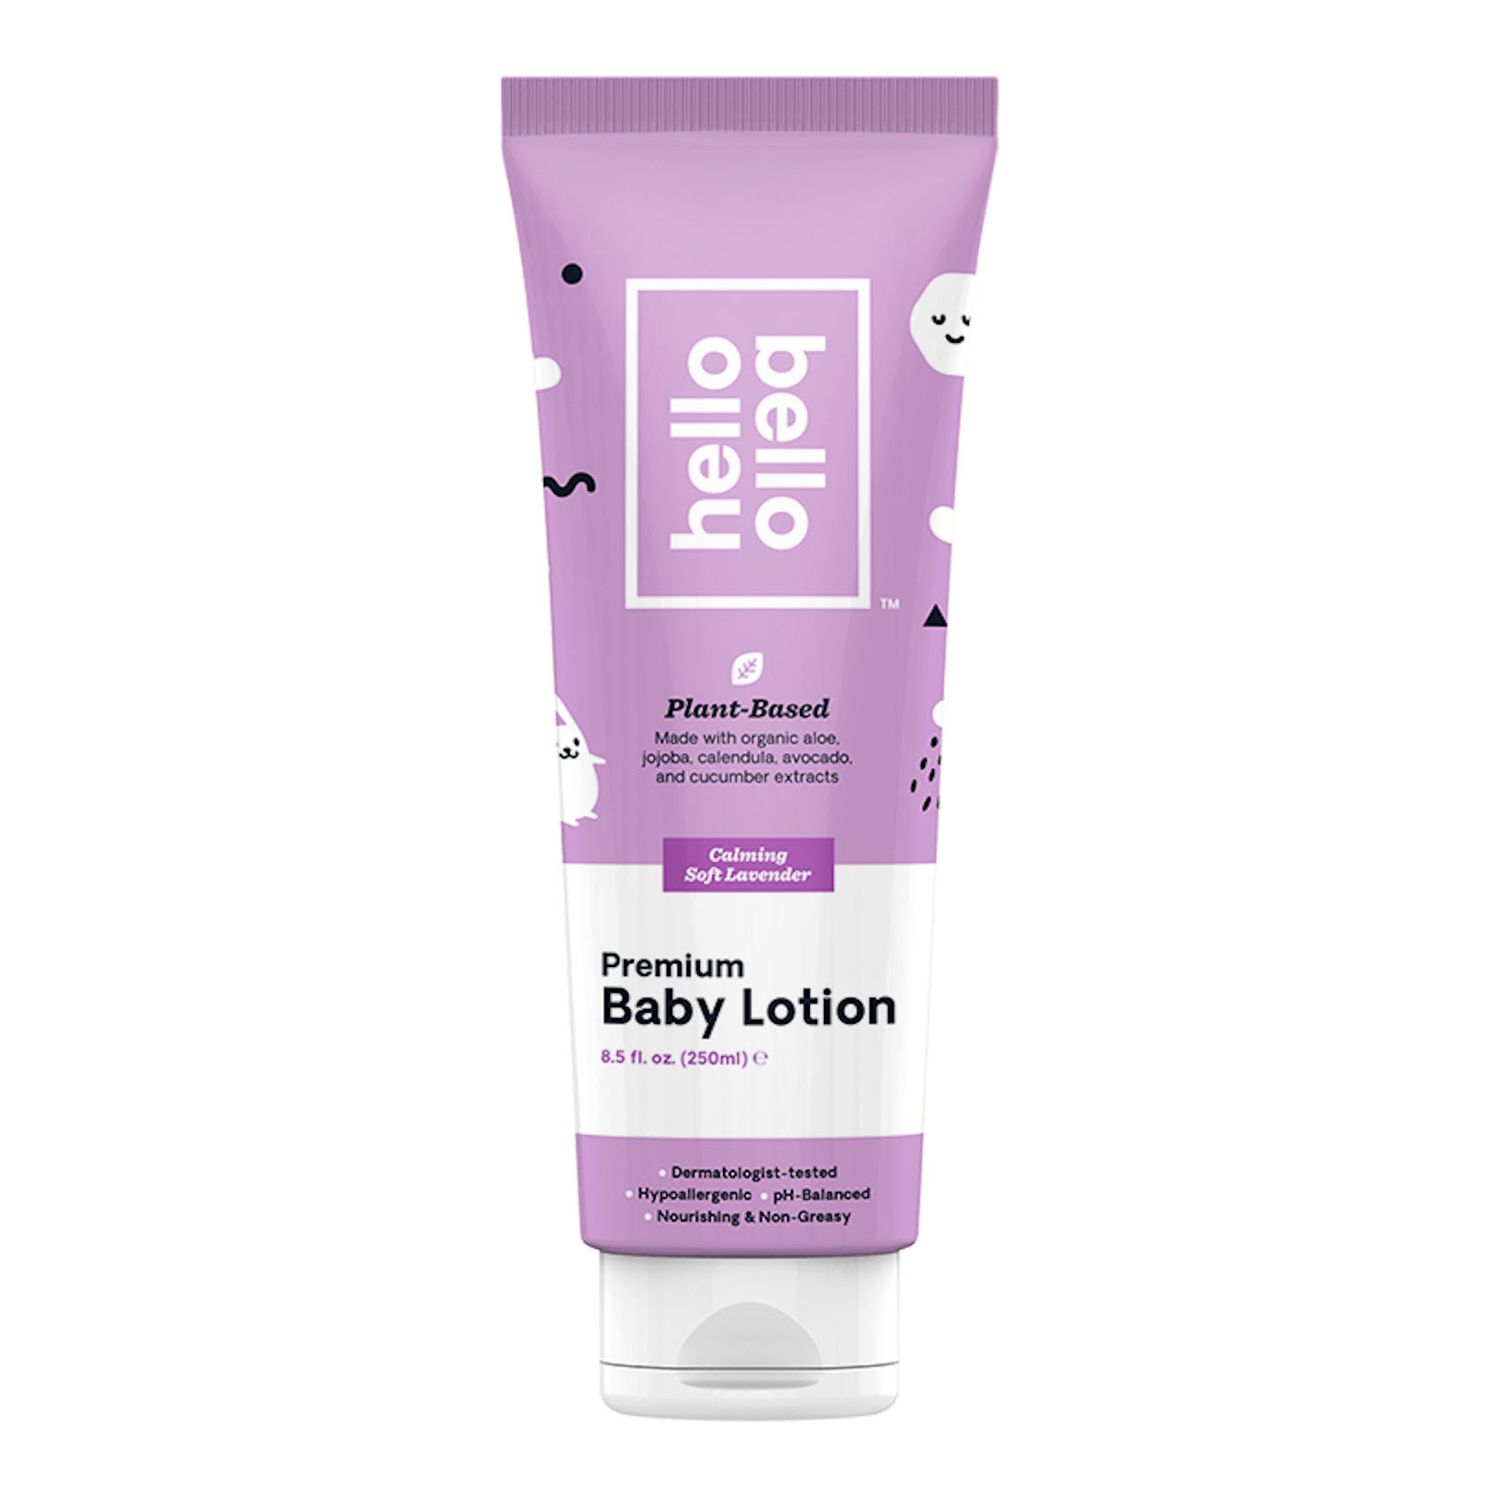 Image for Hello Bello Baby Lotion Lavender at Kohl's.